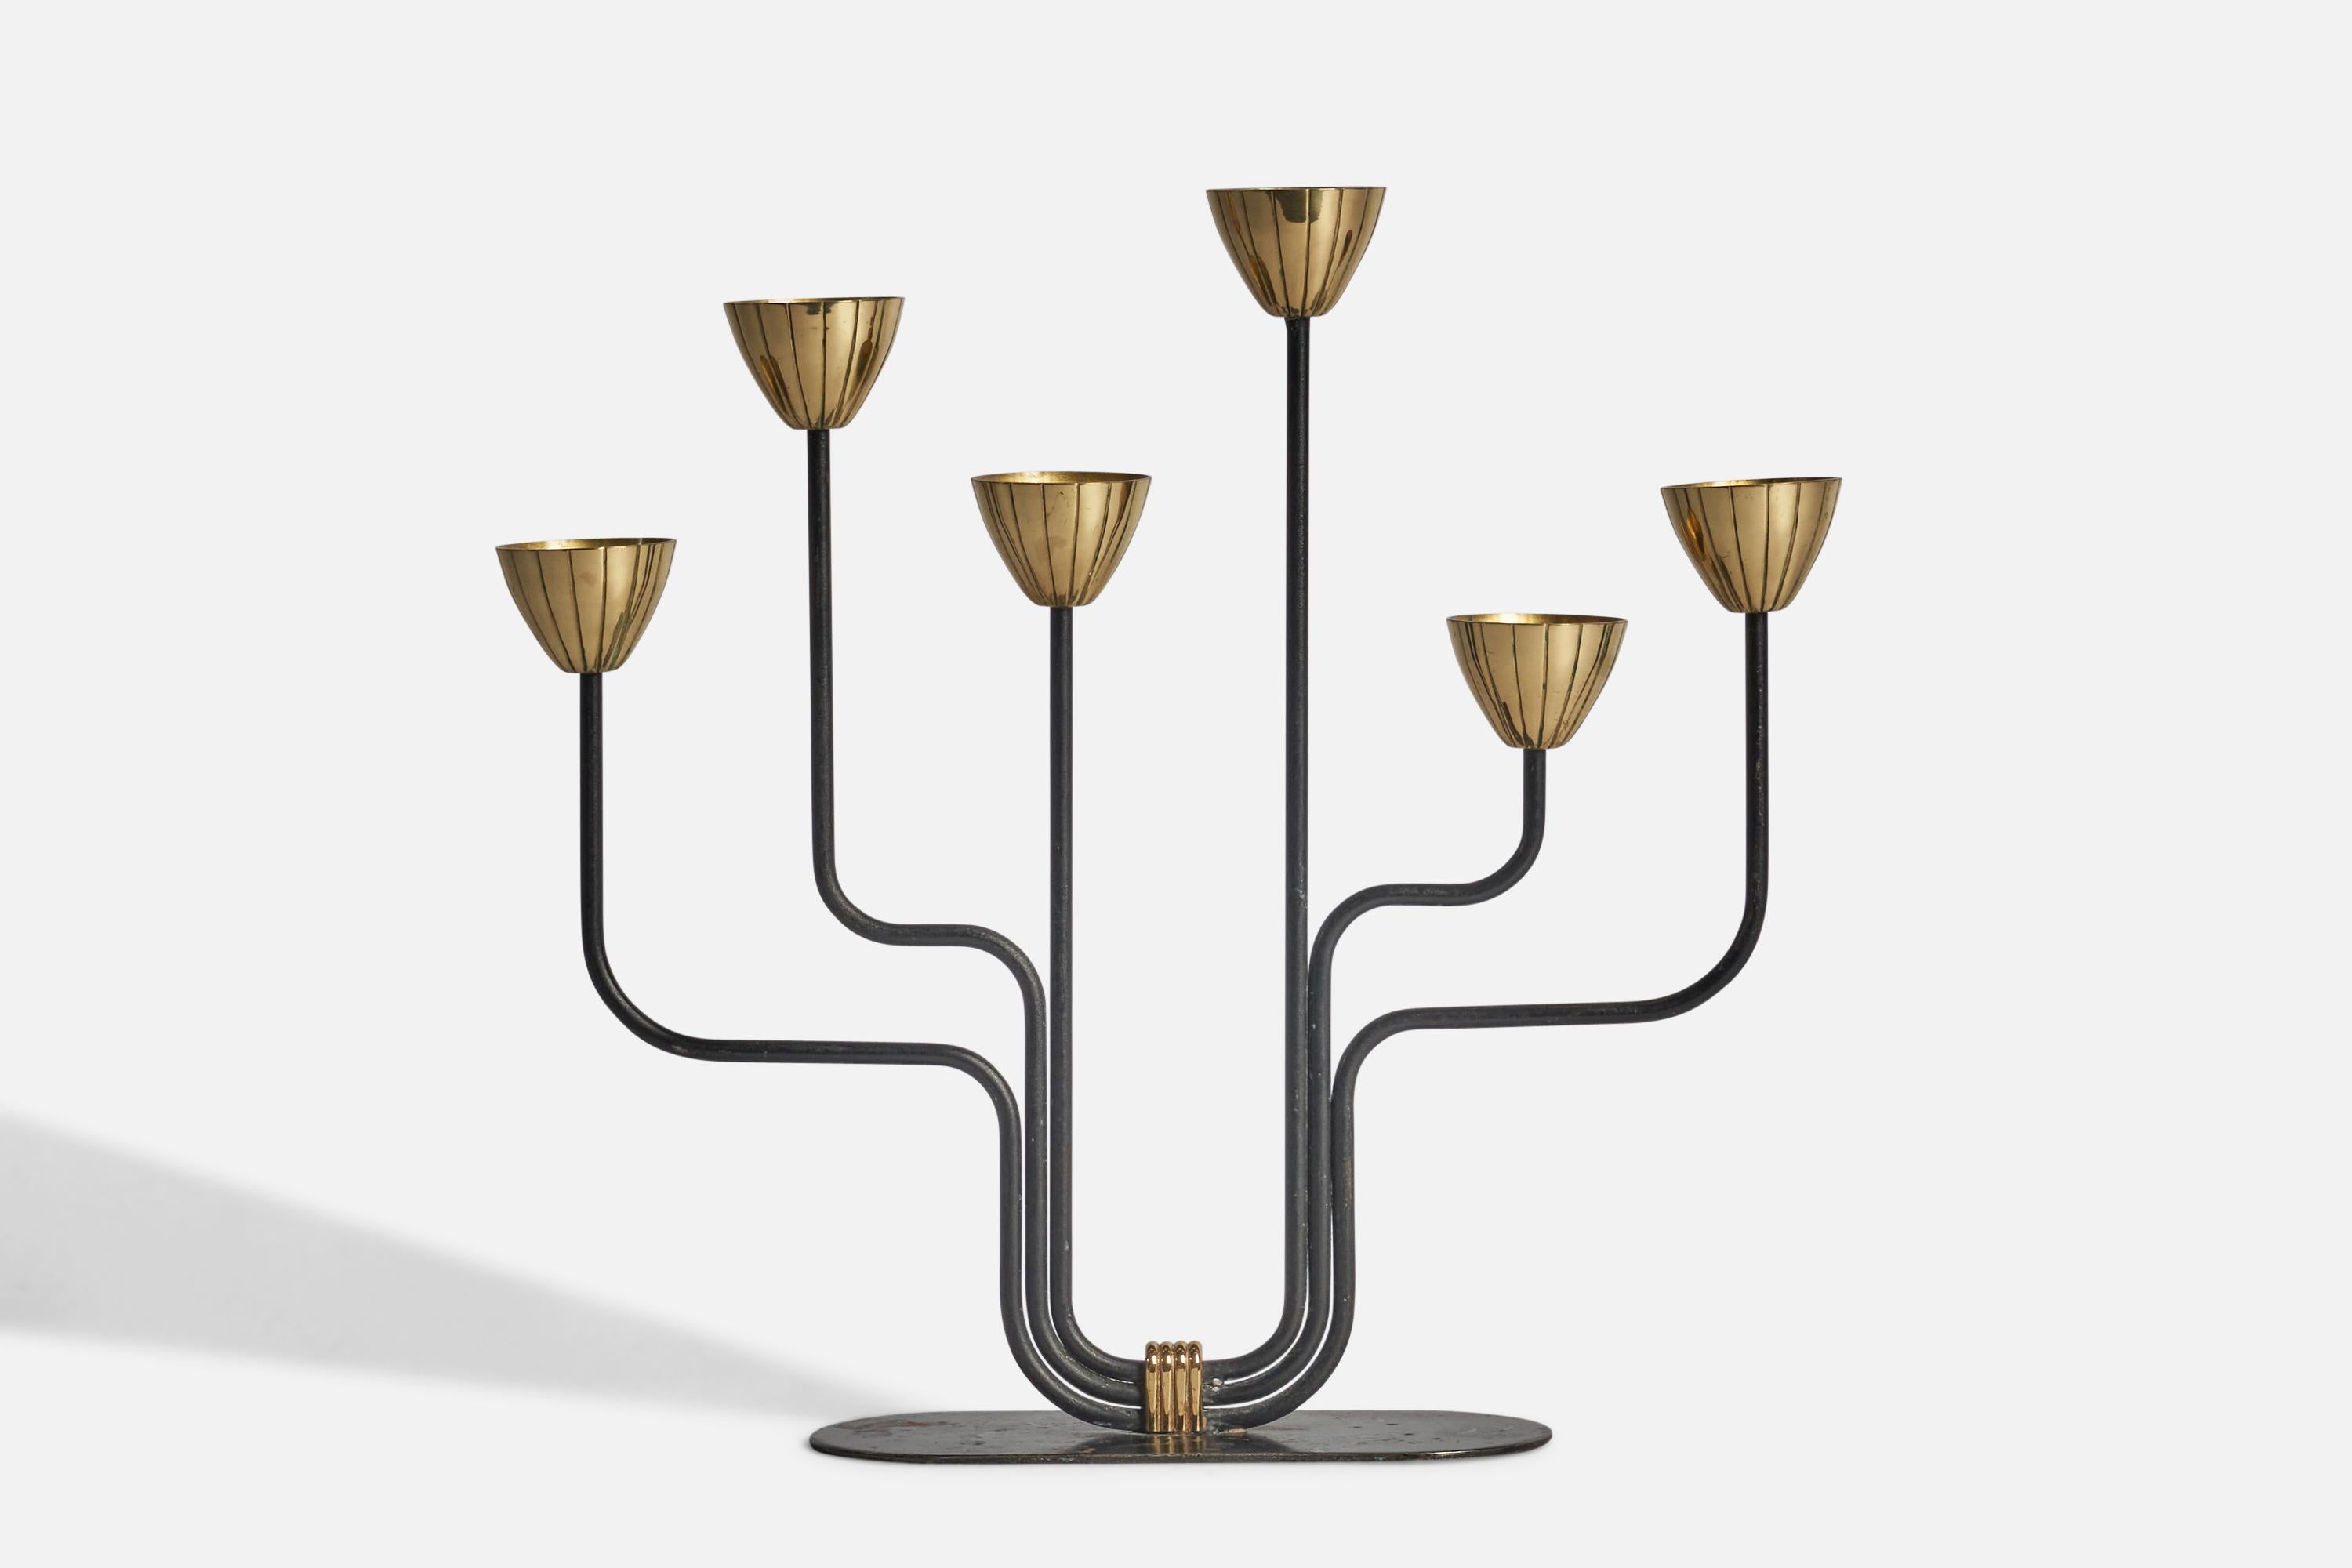 A brass and black-lacquered metal candelabra designed by Gunnar Ander and produced by Ystad-Metall, Sweden, 1950s.

Fits 0.5” diameter candles